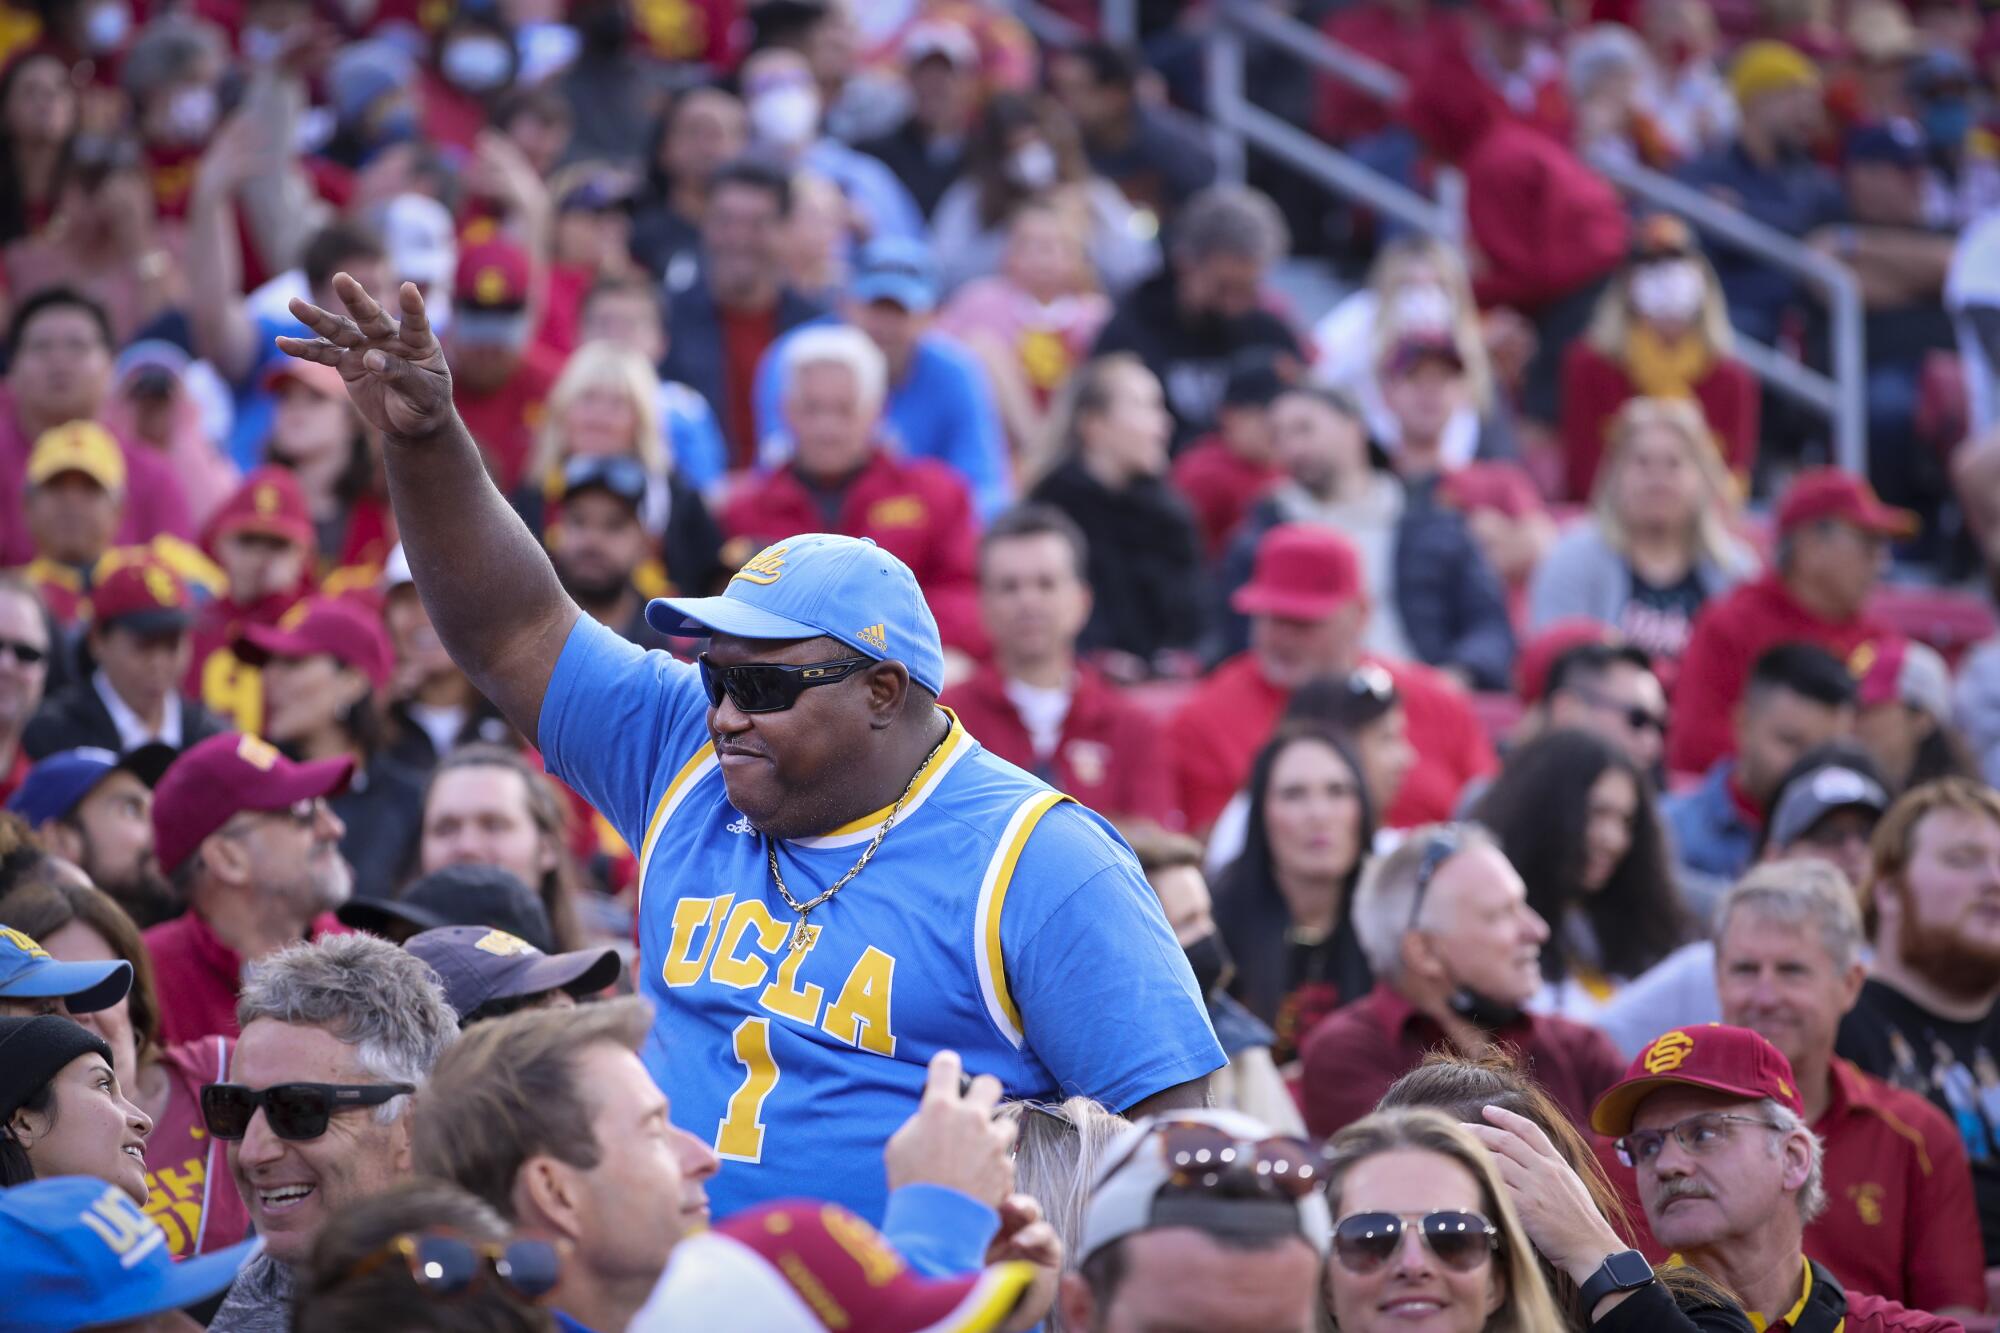 Surrounded by USC fans, a UCLA fan celebrates his team's looming victory.